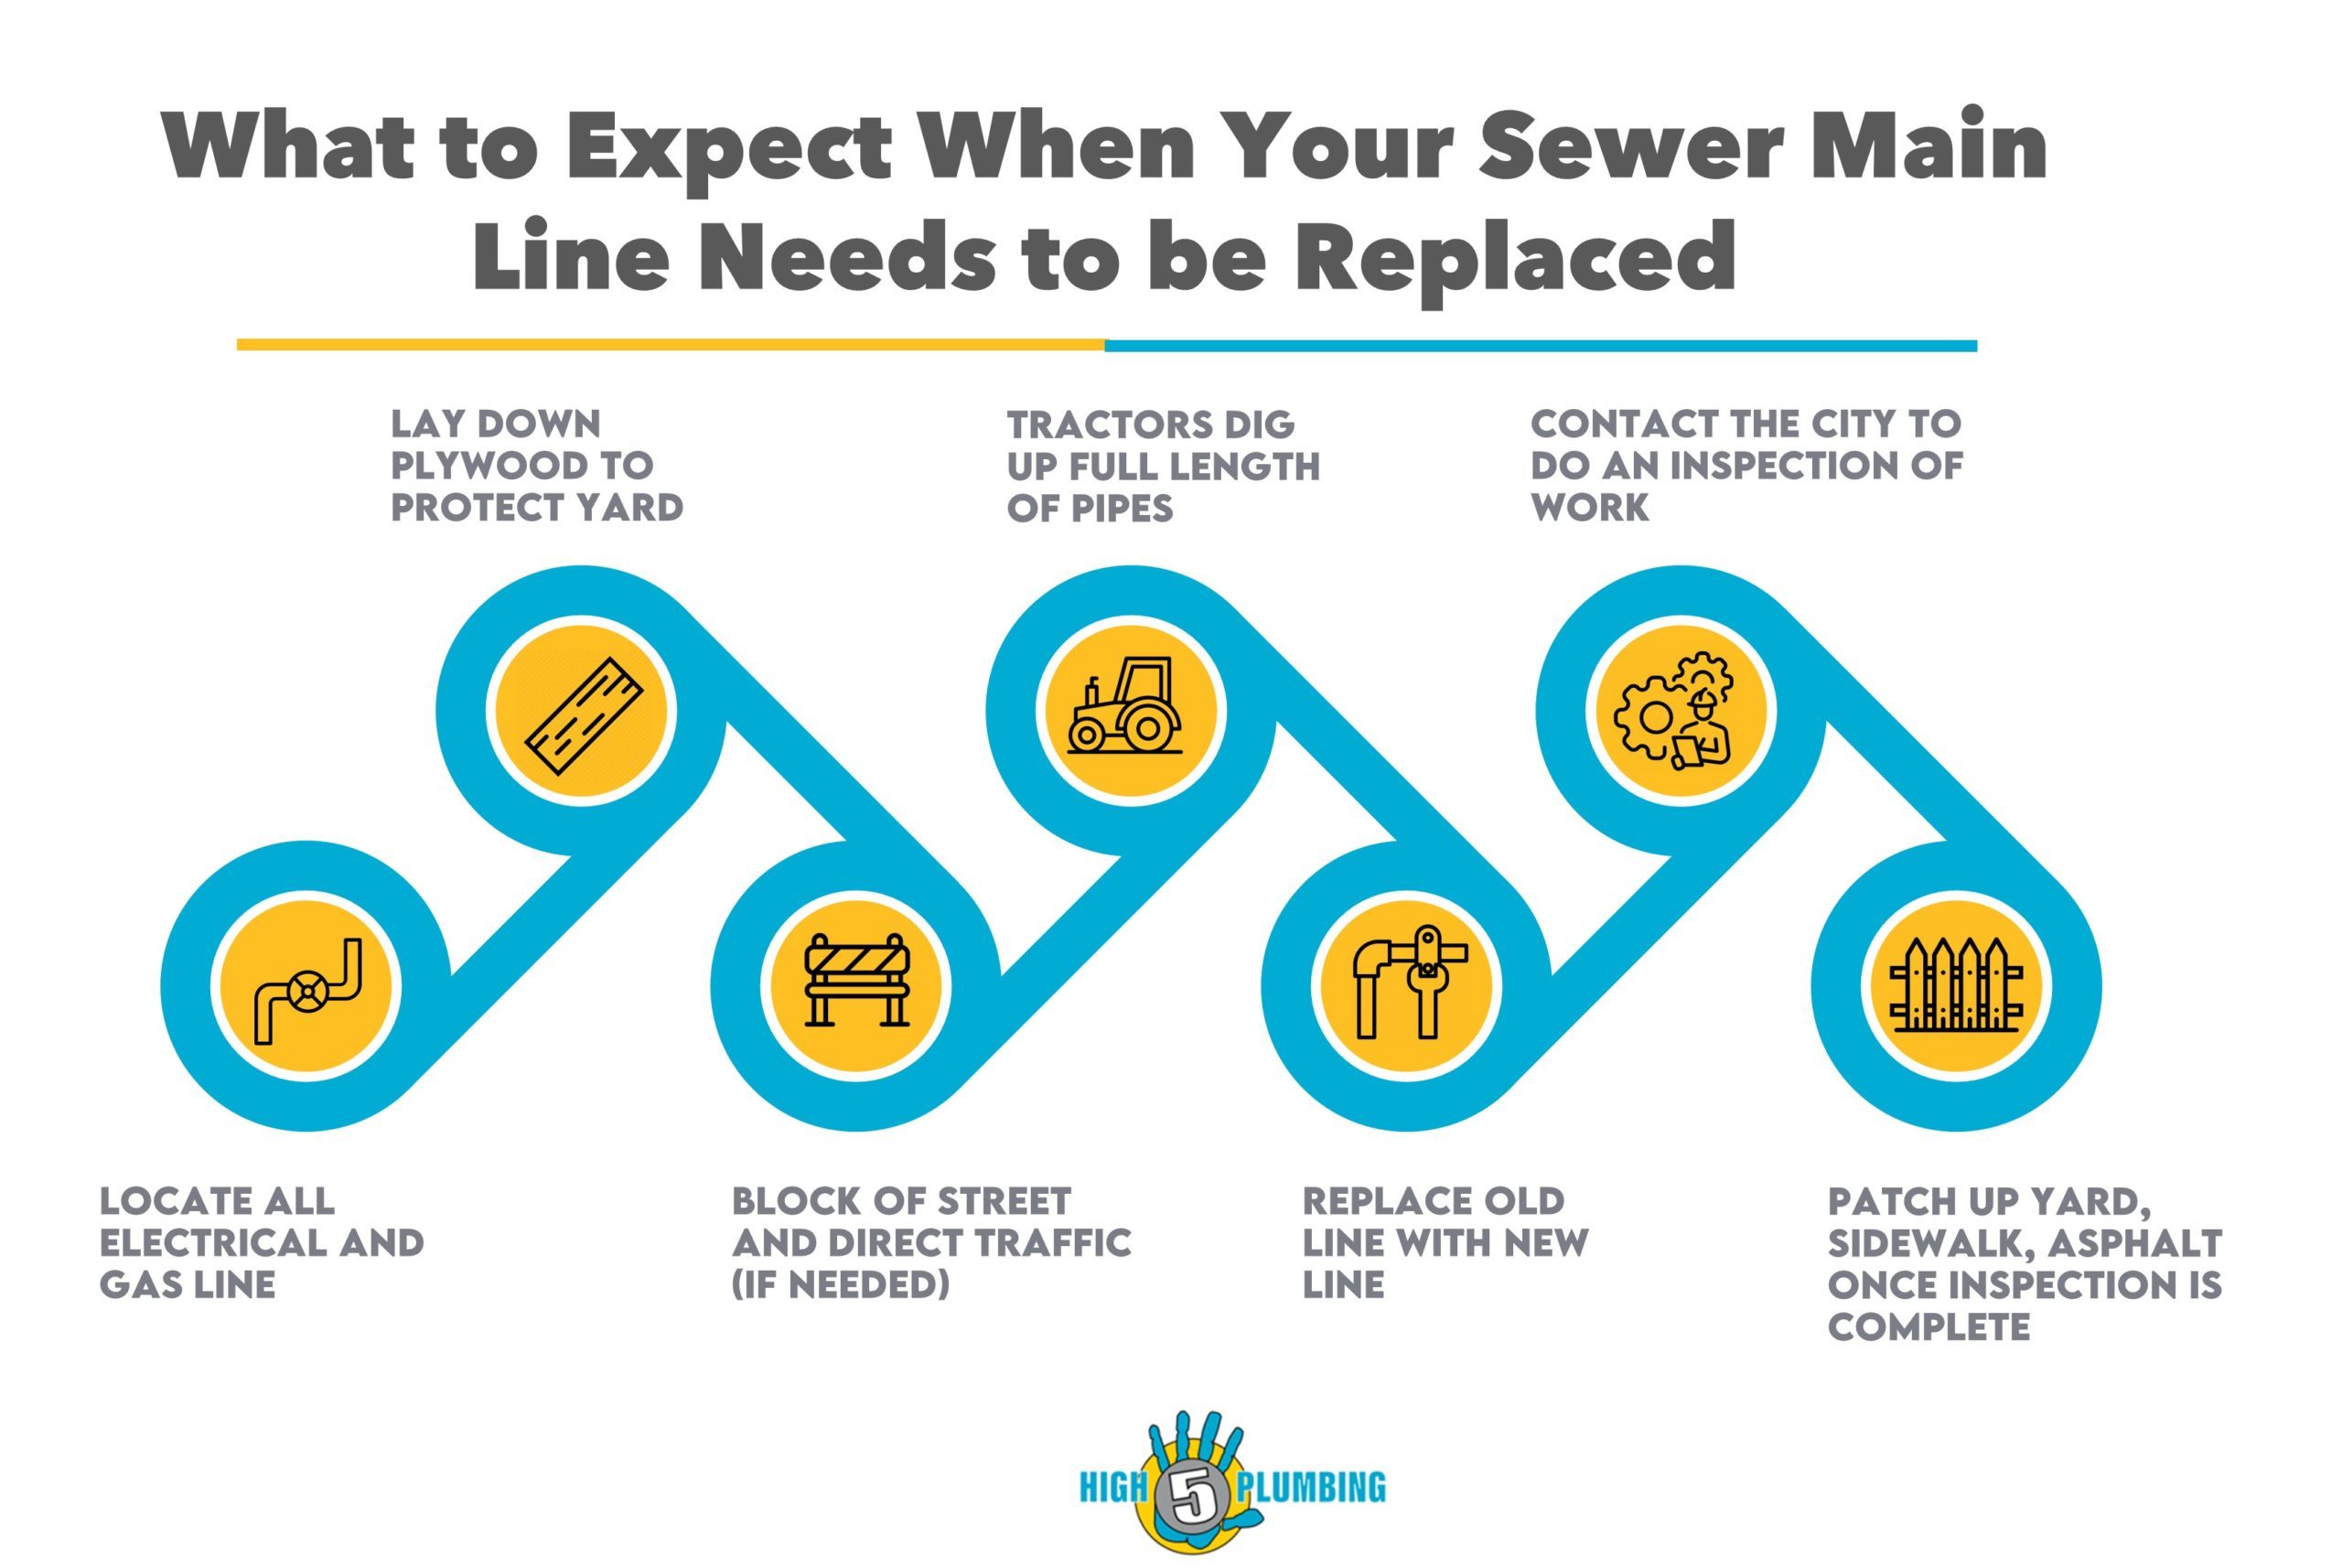 What to Expect When Your Sewer Main Line Needs to be Replaced